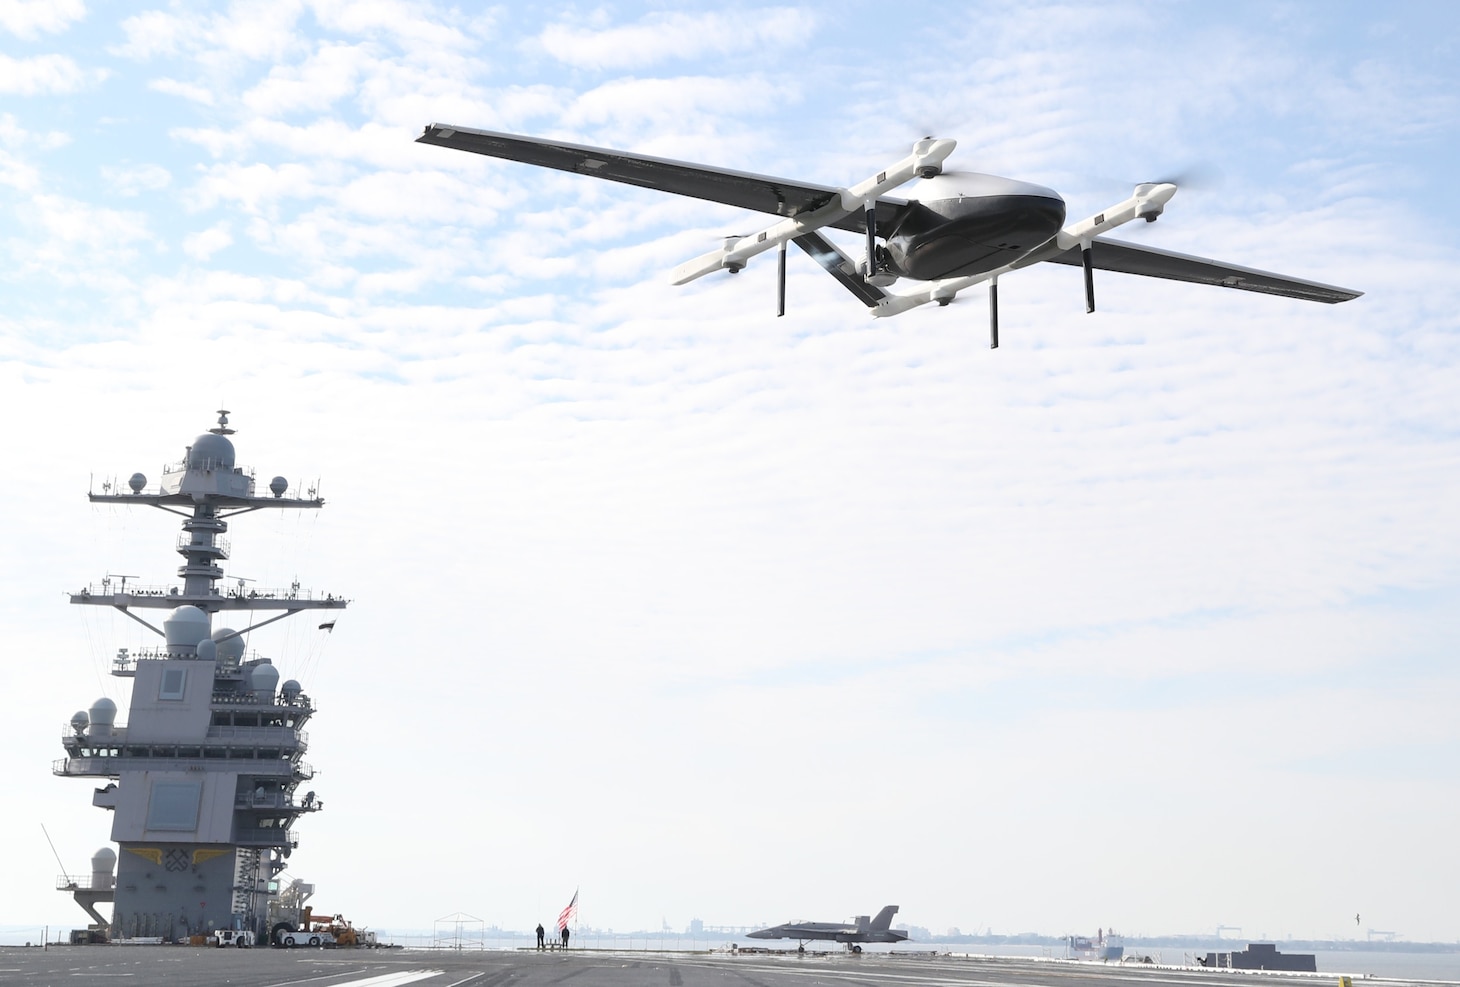 Unmanned Air System (UAS) prototype, called Blue Water UAS, approaches to deliver cargo on USS Gerald R. Ford’s (CVN 78) flight deck